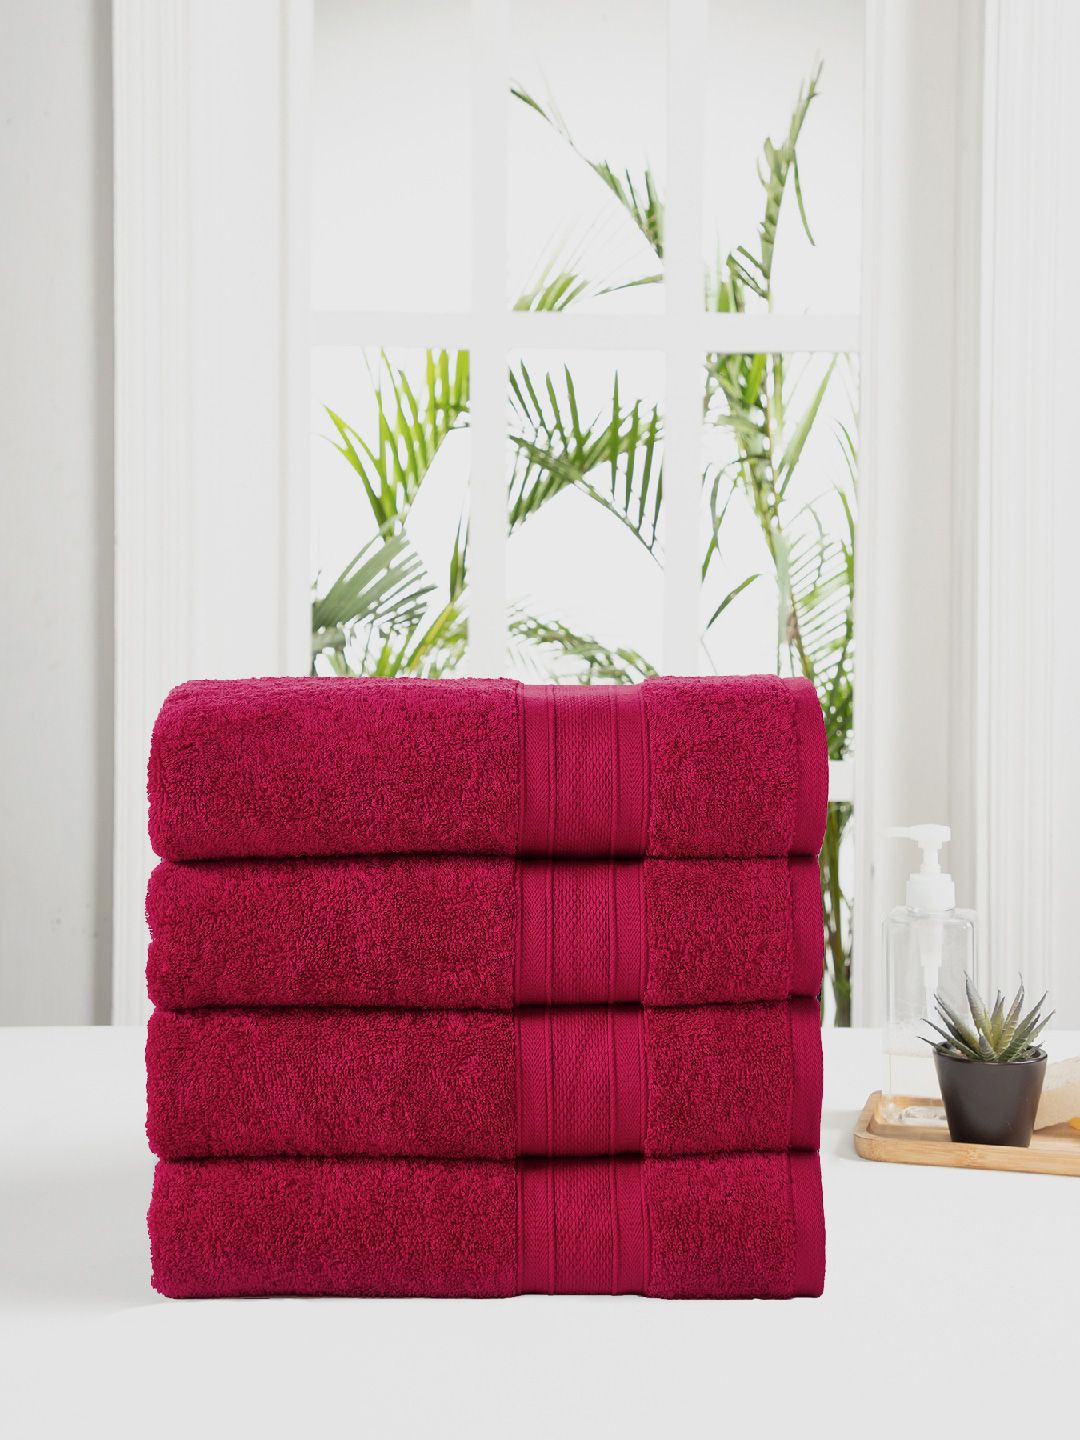 Trident 4 Piece Bath Towel Set Red Soft and Plush 100% Cotton 500 GSM Price in India